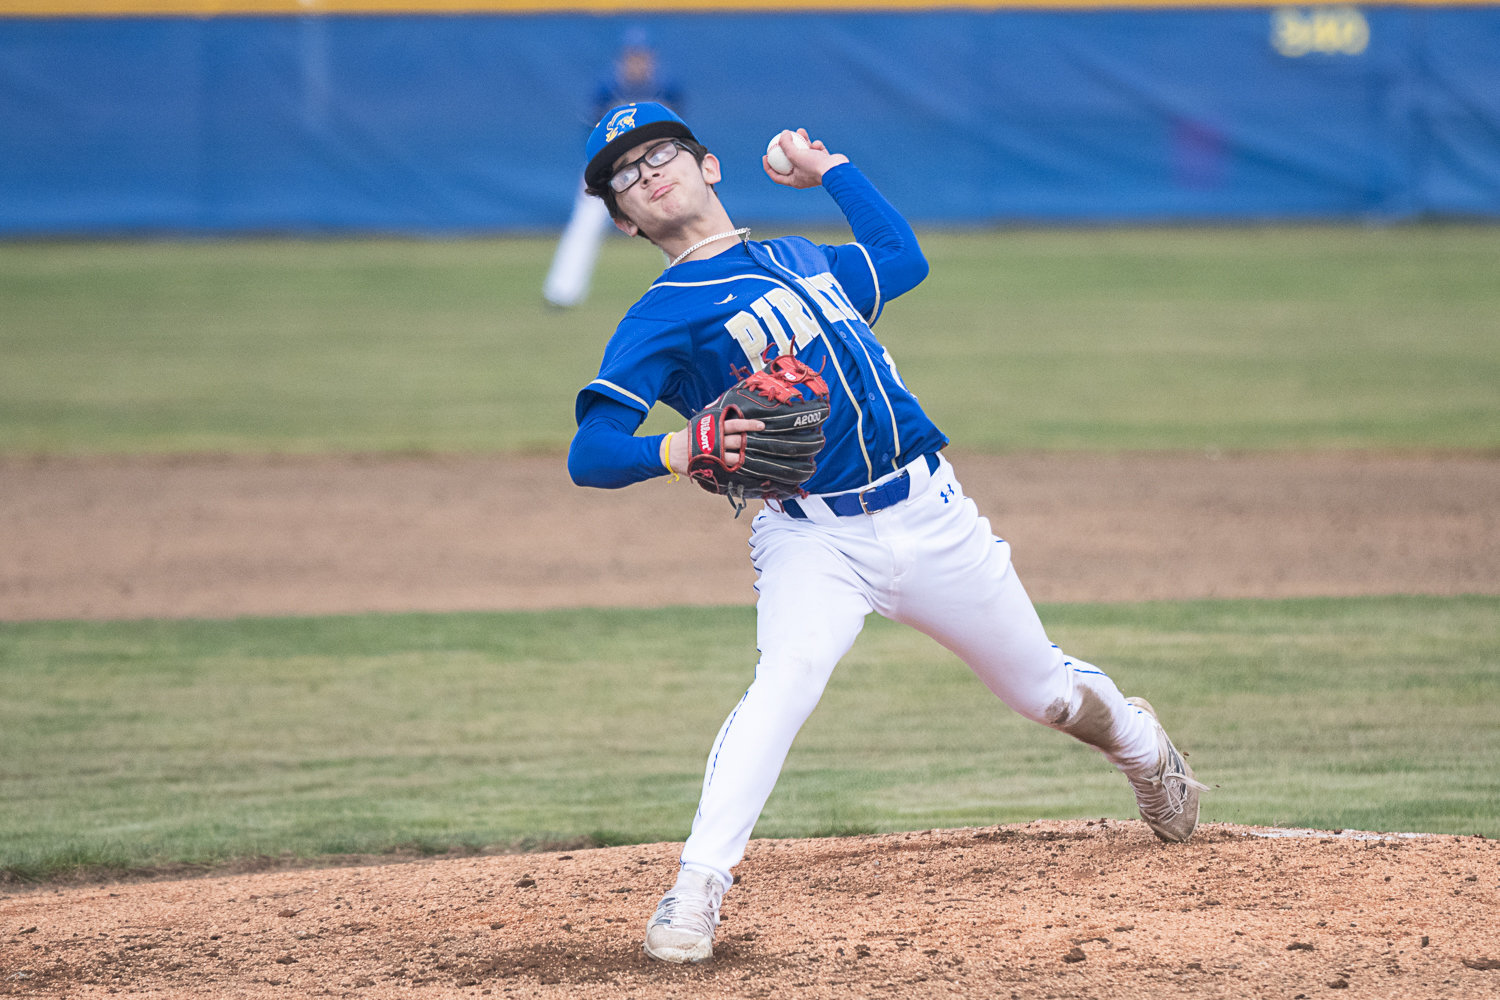 Tristan Percival throws a pitch during Adna's 10-4 win over Napavine on March 15.